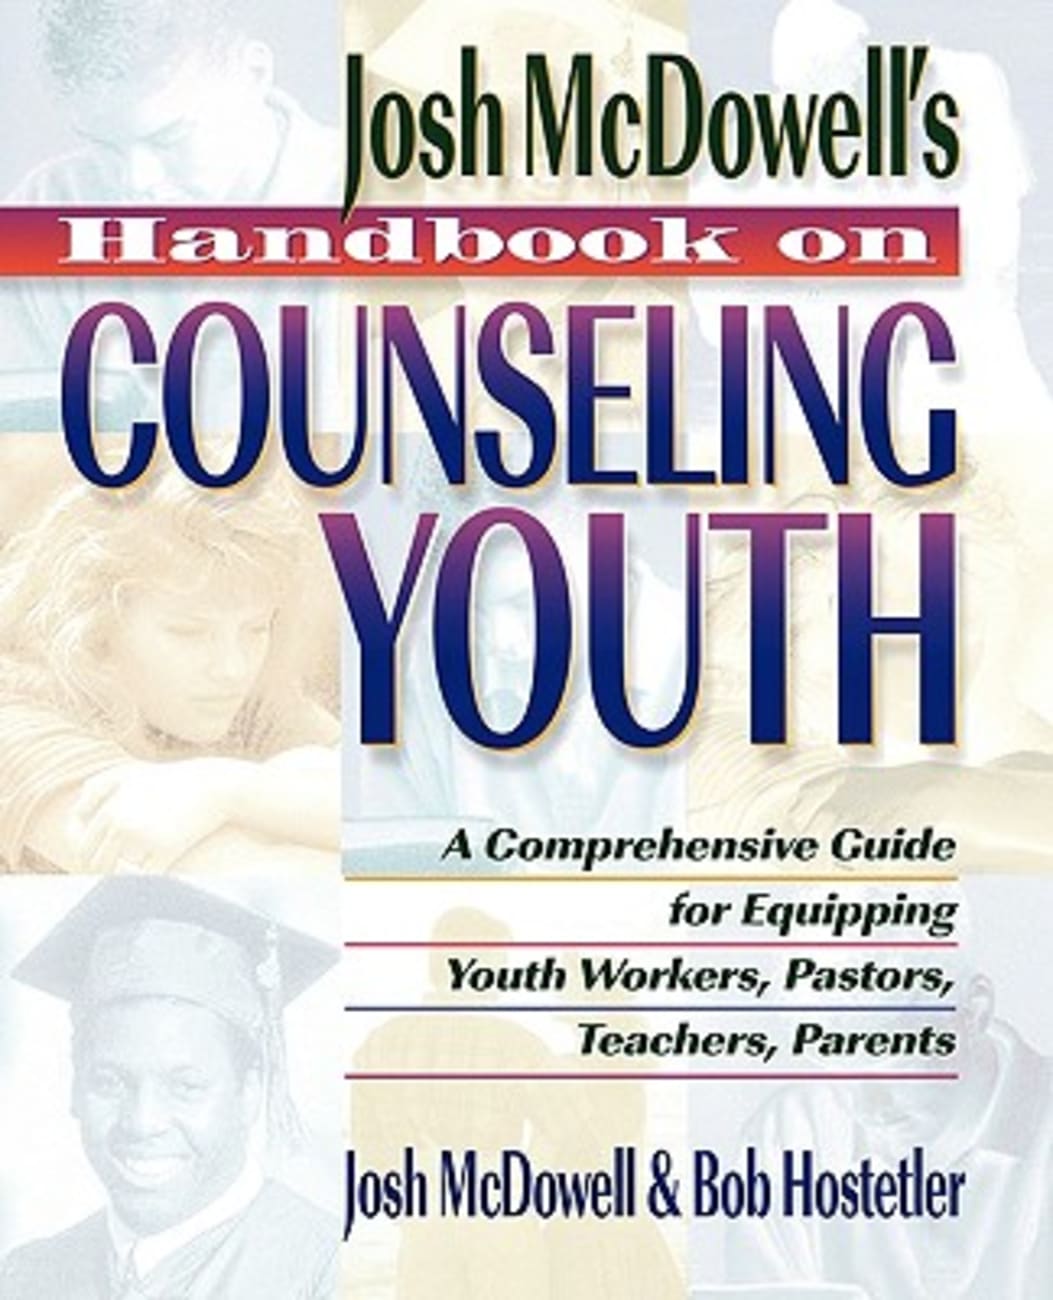 Josh Mcdowell's Handbook on Counseling Youth Paperback